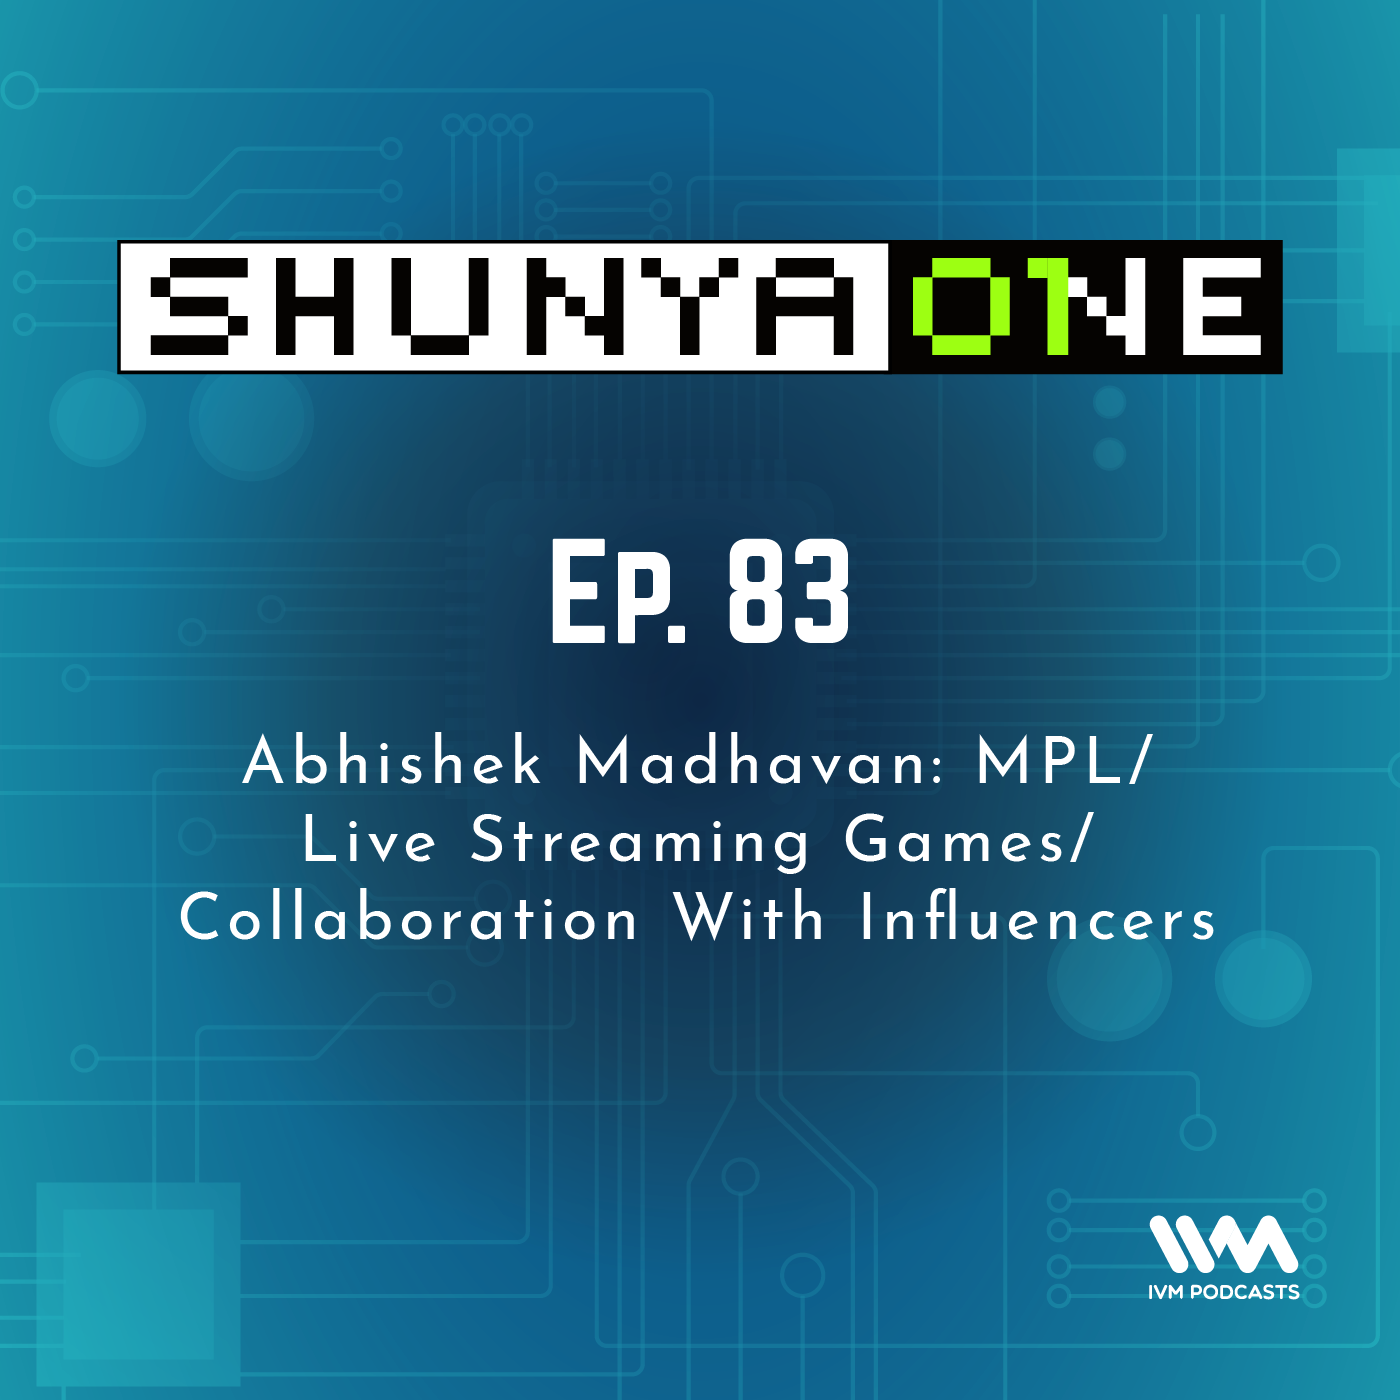 Feat. Abhishek Madhavan: MPL/ Live Streaming Games/Collaboration With Influencers